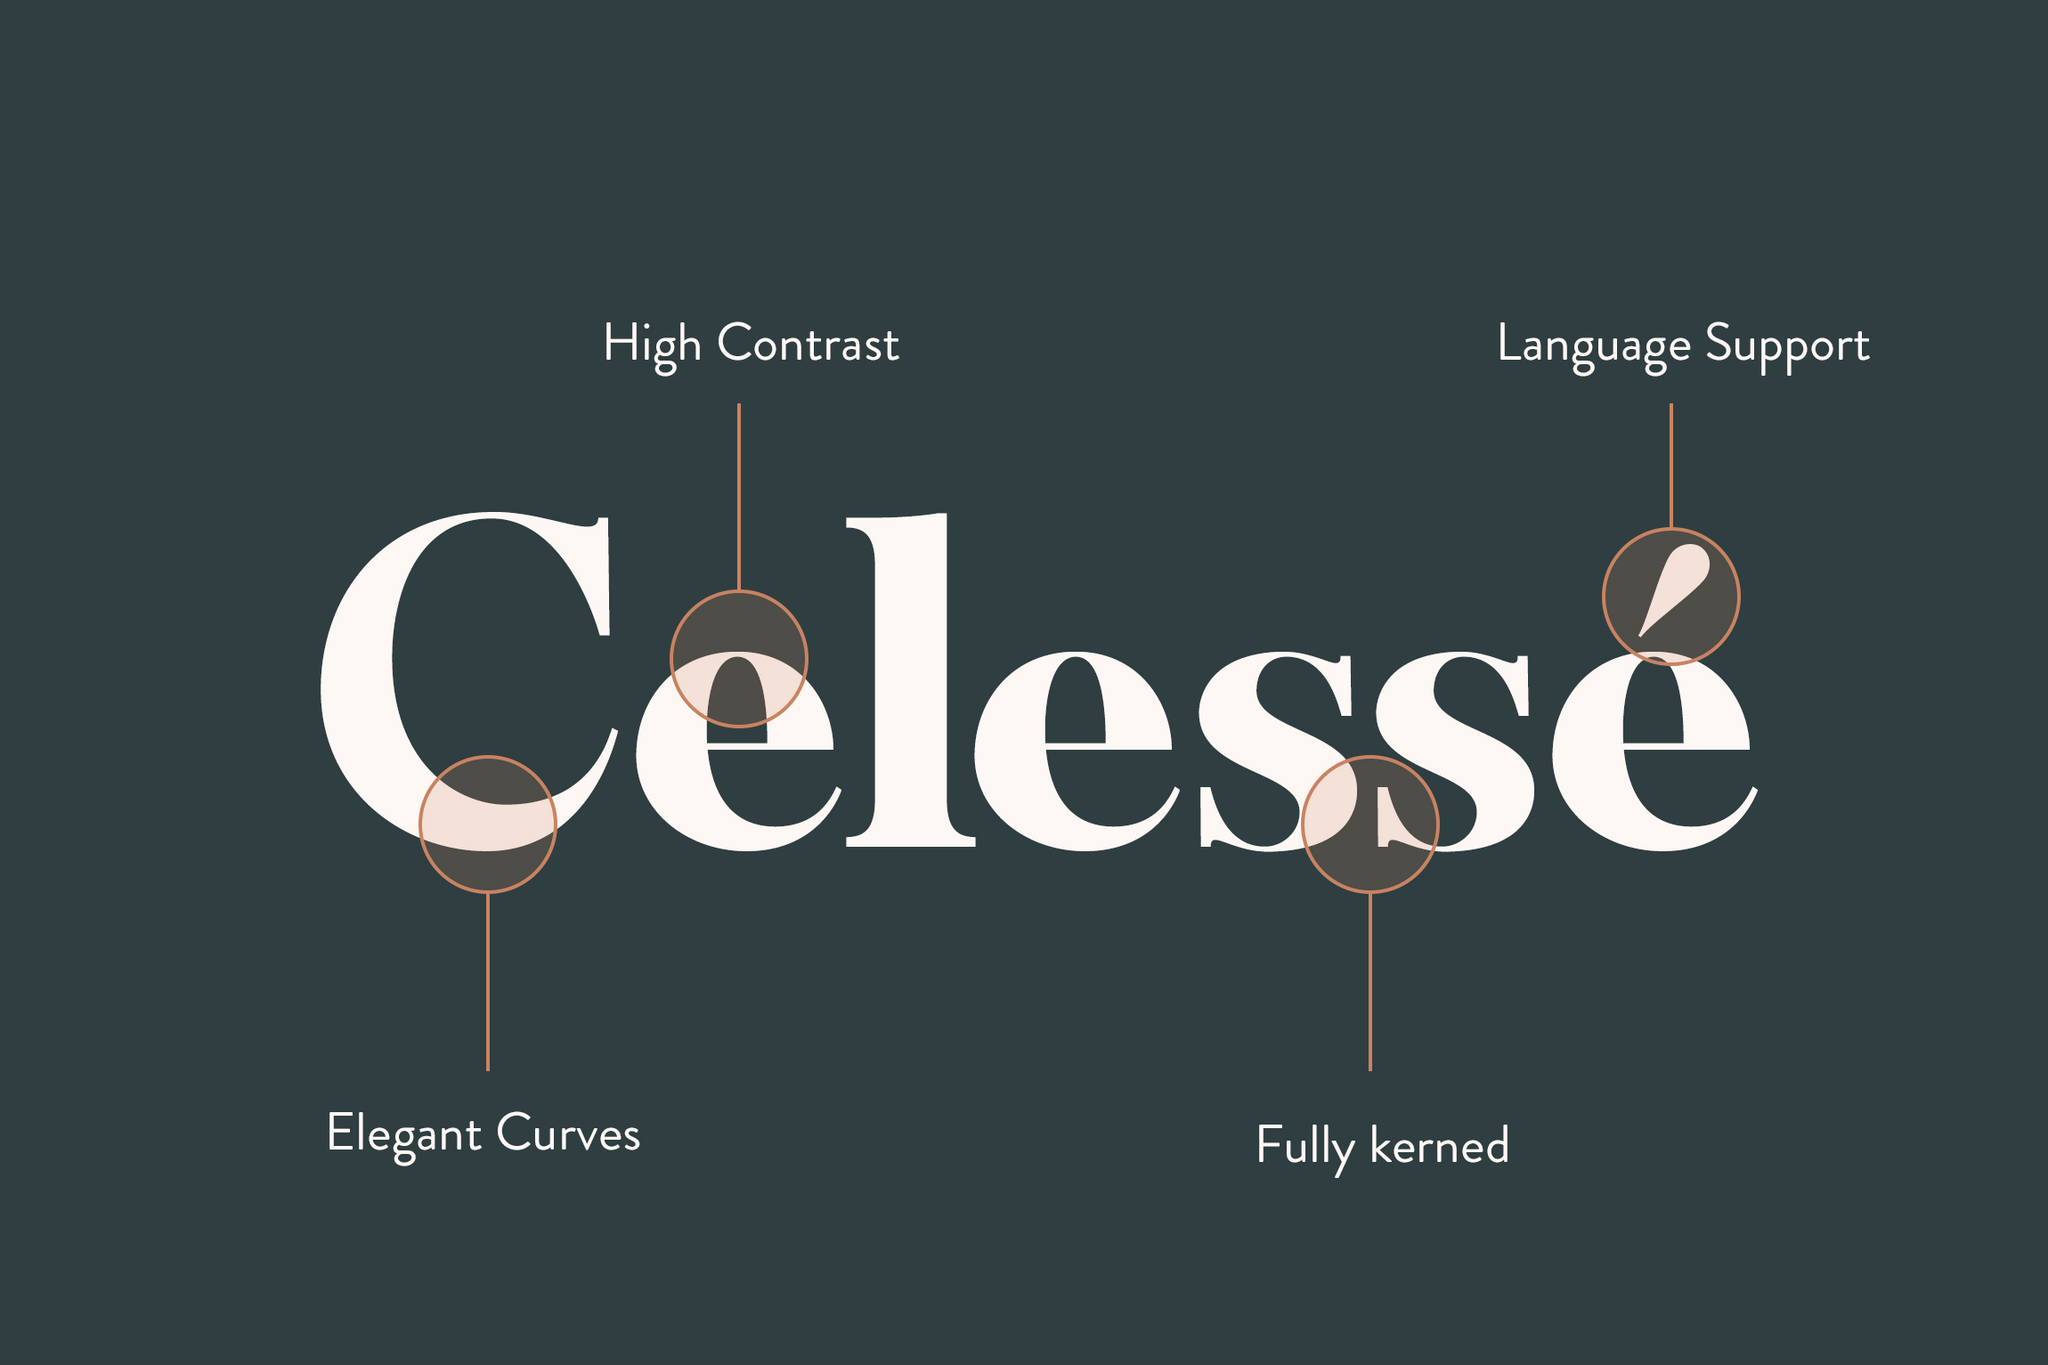 Celesse - Typography Features - High Contrast, Curves, Language Support, Kerning